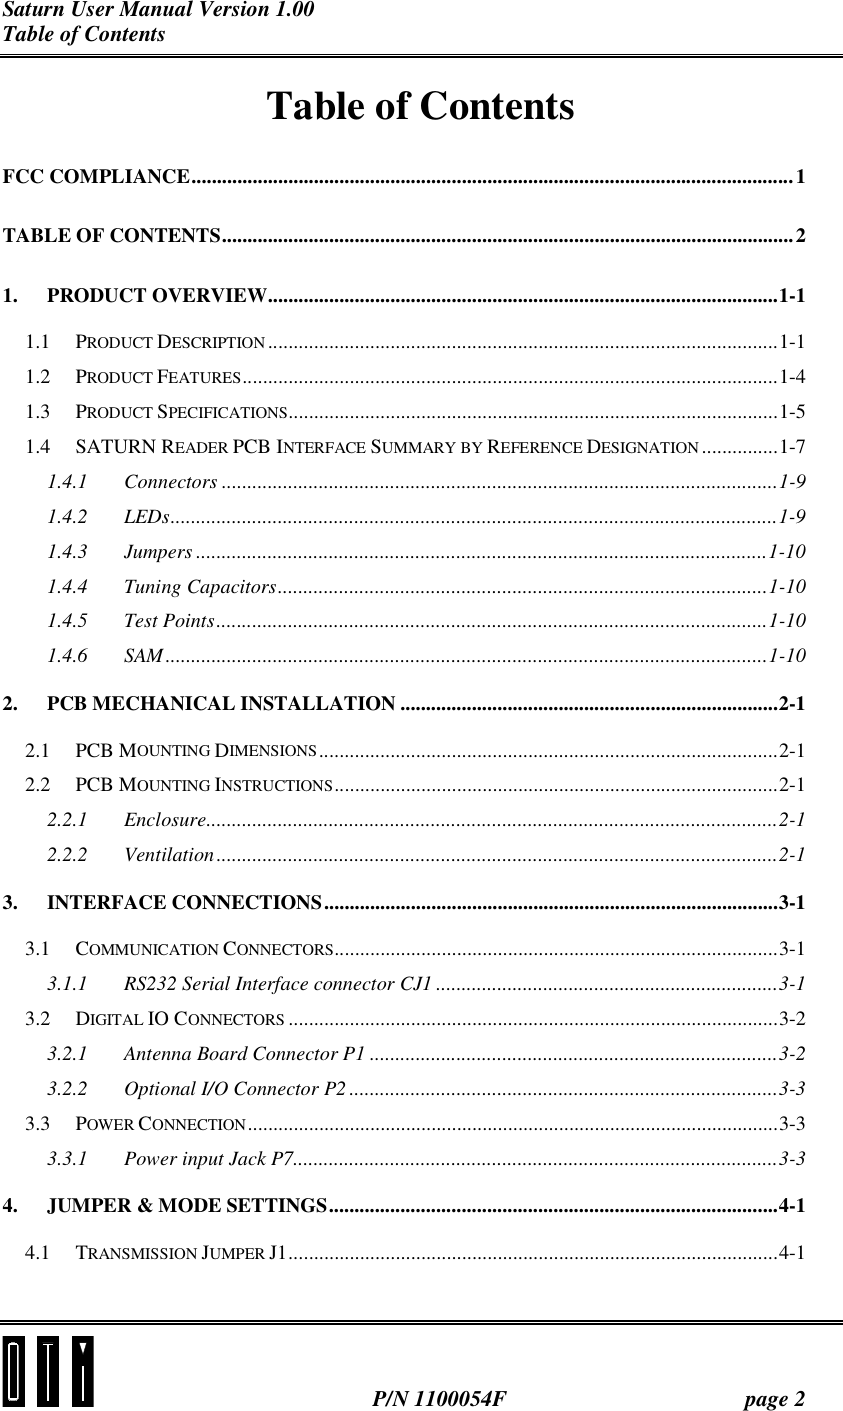 Saturn User Manual Version 1.00 Table of Contents   P/N 1100054F  page 2 Table of Contents FCC COMPLIANCE......................................................................................................................1 TABLE OF CONTENTS................................................................................................................2 1. PRODUCT OVERVIEW....................................................................................................1-1 1.1 PRODUCT DESCRIPTION ....................................................................................................1-1 1.2 PRODUCT FEATURES.........................................................................................................1-4 1.3 PRODUCT SPECIFICATIONS................................................................................................1-5 1.4 SATURN READER PCB INTERFACE SUMMARY BY REFERENCE DESIGNATION...............1-7 1.4.1 Connectors .............................................................................................................1-9 1.4.2 LEDs.......................................................................................................................1-9 1.4.3 Jumpers ................................................................................................................1-10 1.4.4 Tuning Capacitors................................................................................................1-10 1.4.5 Test Points............................................................................................................1-10 1.4.6 SAM......................................................................................................................1-10 2. PCB MECHANICAL INSTALLATION ..........................................................................2-1 2.1 PCB MOUNTING DIMENSIONS..........................................................................................2-1 2.2 PCB MOUNTING INSTRUCTIONS.......................................................................................2-1 2.2.1 Enclosure................................................................................................................2-1 2.2.2 Ventilation ..............................................................................................................2-1 3. INTERFACE CONNECTIONS.........................................................................................3-1 3.1 COMMUNICATION CONNECTORS.......................................................................................3-1 3.1.1 RS232 Serial Interface connector CJ1 ...................................................................3-1 3.2 DIGITAL IO CONNECTORS ................................................................................................3-2 3.2.1 Antenna Board Connector P1 ................................................................................3-2 3.2.2 Optional I/O Connector P2 ....................................................................................3-3 3.3 POWER CONNECTION........................................................................................................3-3 3.3.1 Power input Jack P7...............................................................................................3-3 4. JUMPER &amp; MODE SETTINGS........................................................................................4-1 4.1 TRANSMISSION JUMPER J1................................................................................................4-1 